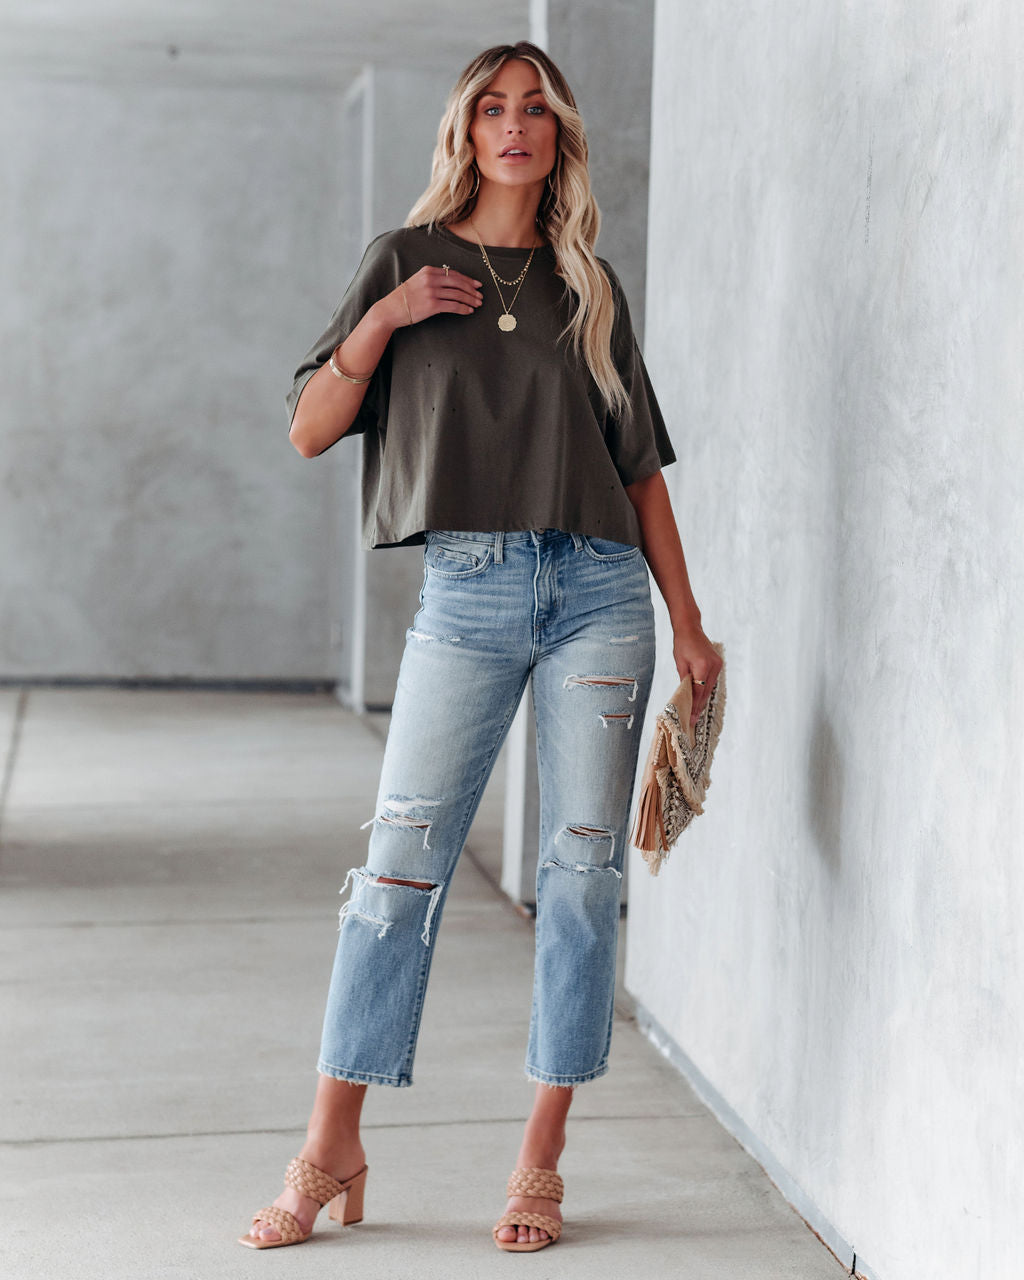 Her Cotton Cropped Tee - Olive